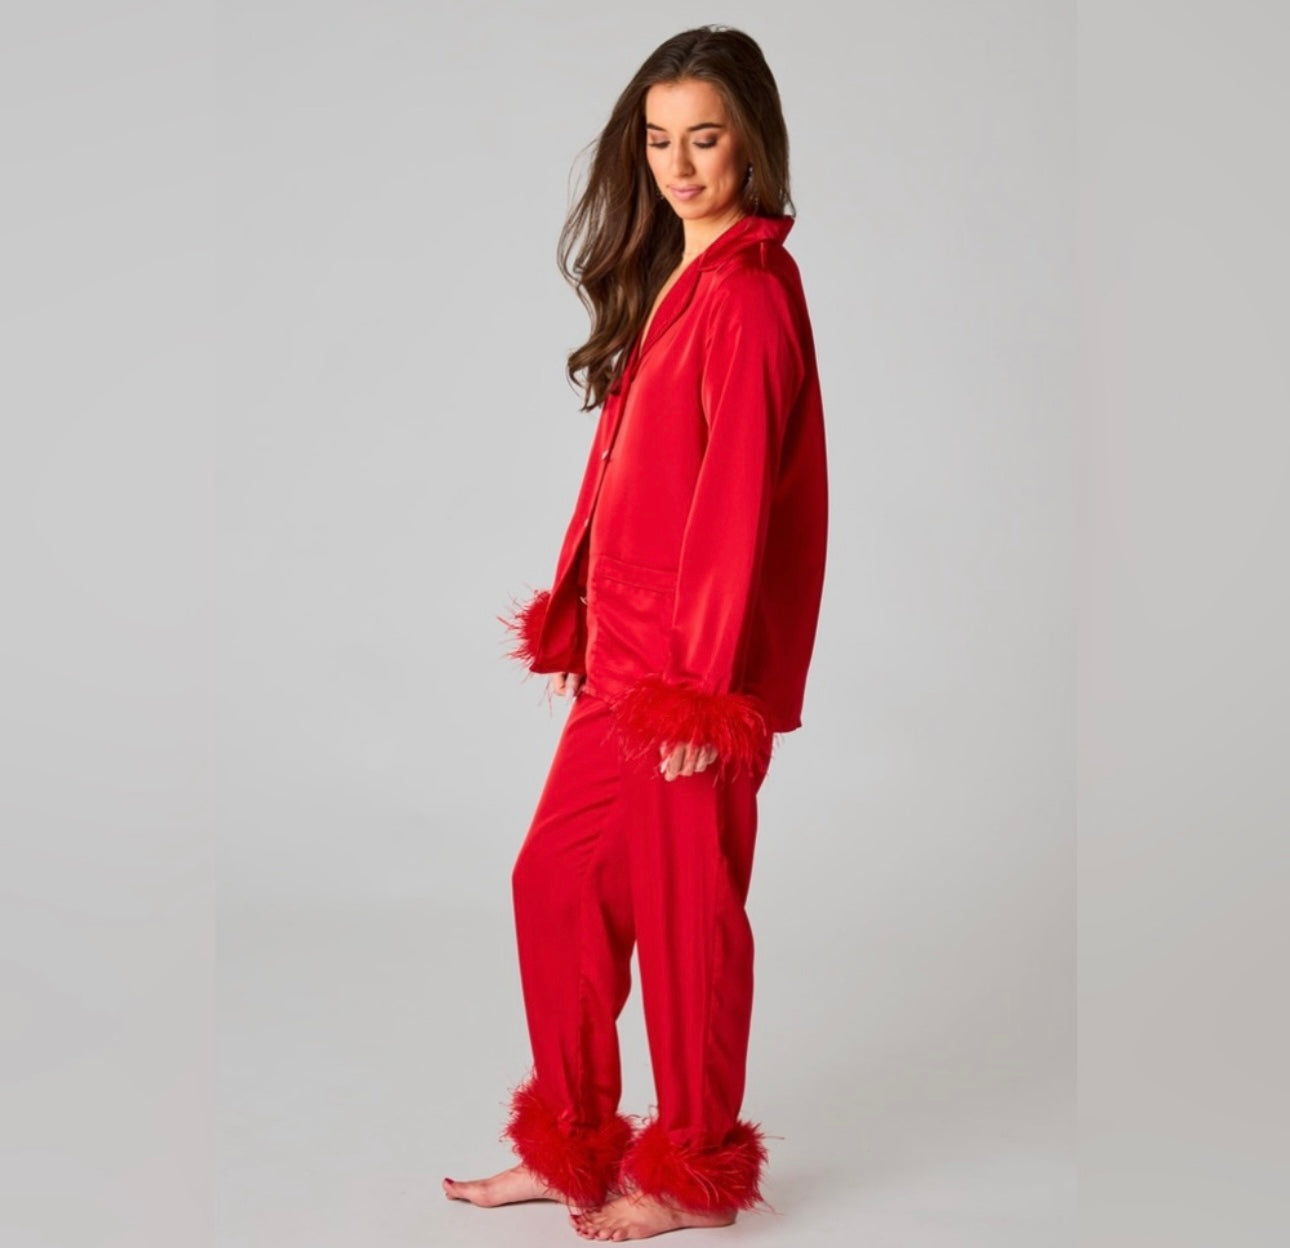 Buddy Love Red Feathers PJ Set